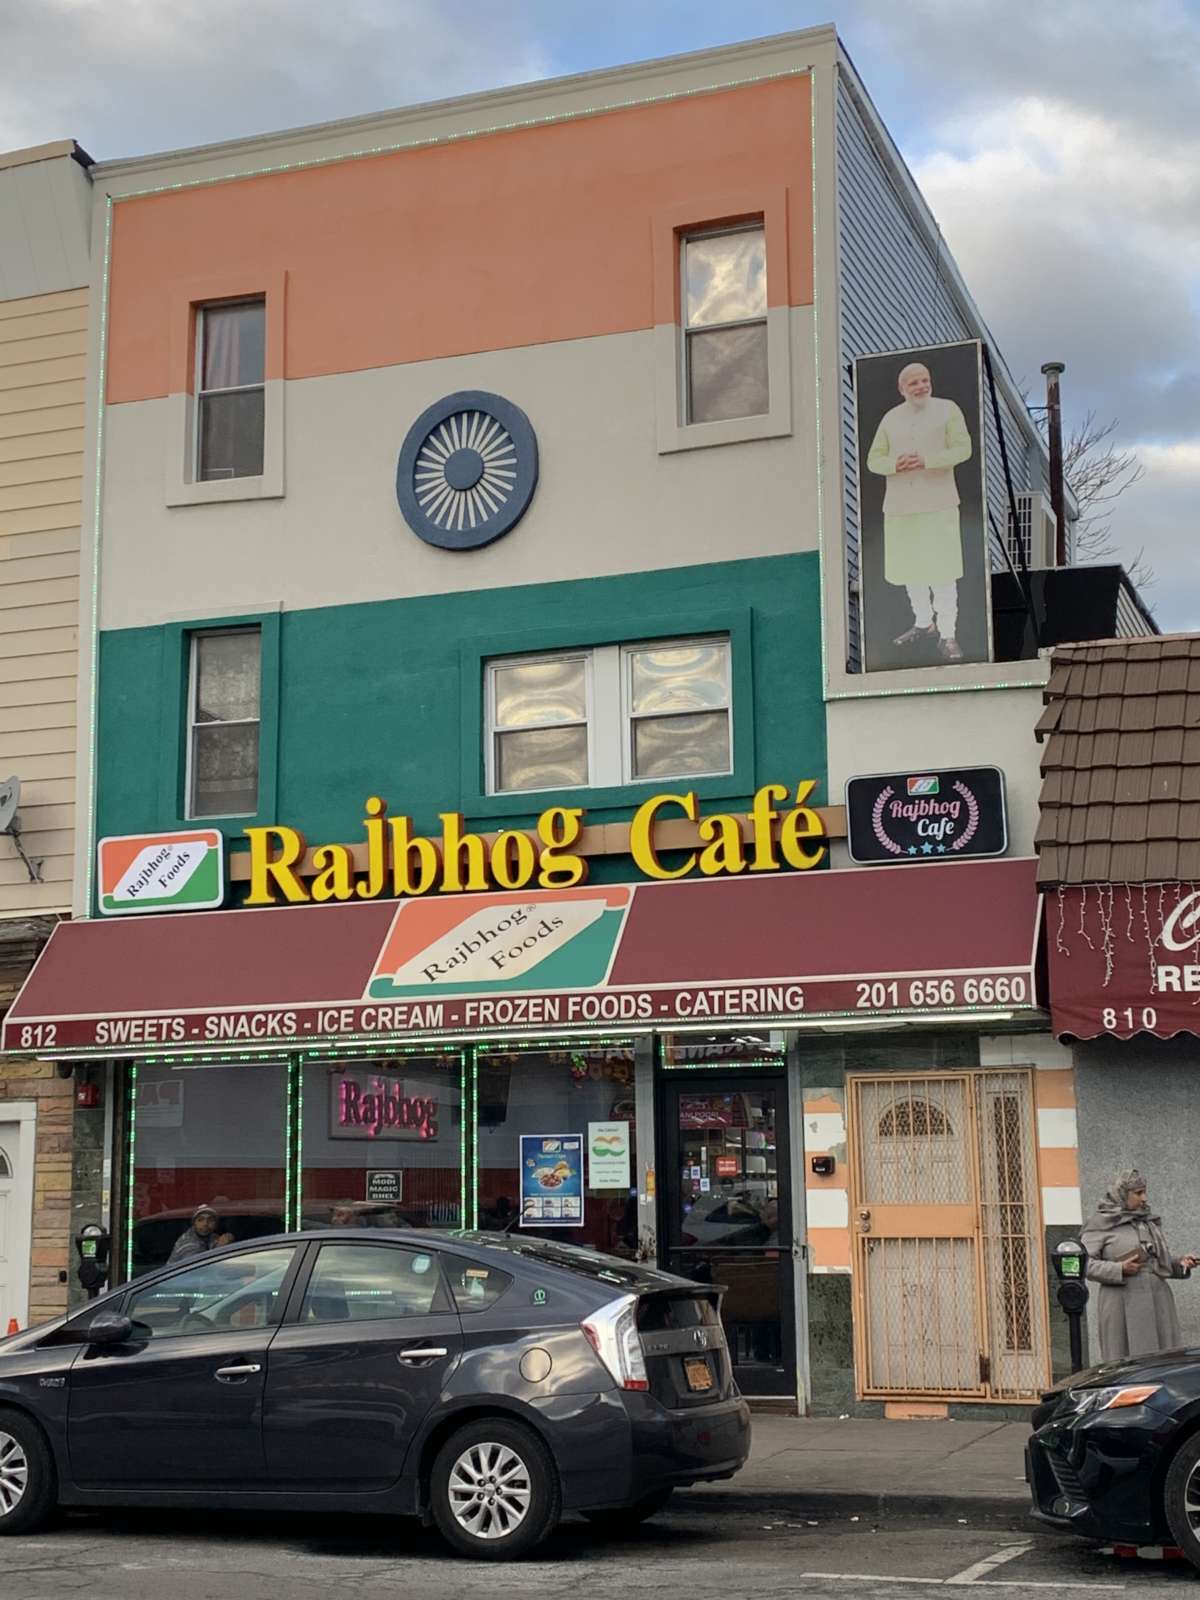 Rajbhog Cafe on Newark Avenue, Jersey City, NJ, where a large picture of a picture of Narendra Modi is hung above.